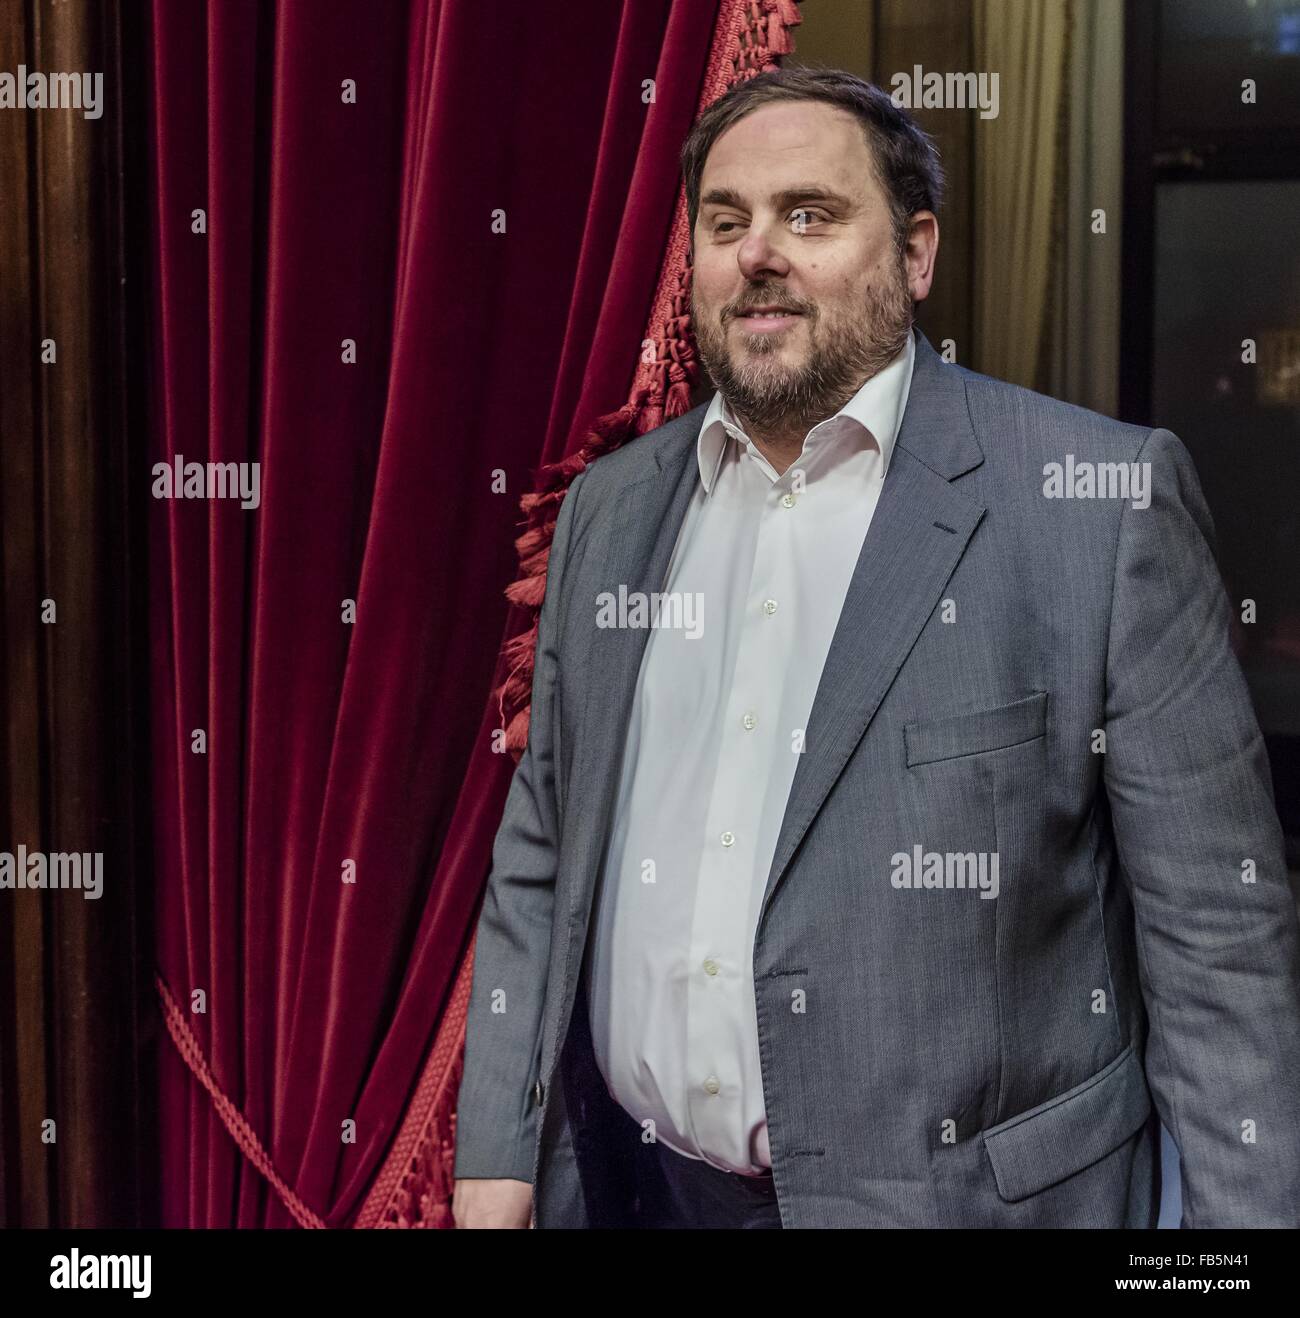 Barcelona, Catalonia, Spain. 10th Jan, 2016. ORIOL JUNQUERAS, leader of the ERC, arrives at the plenary hall for the investiture debate of the Catalan presidency of Carles Puigdemont at the Catalan parliament. © Matthias Oesterle/ZUMA Wire/Alamy Live News Stock Photo